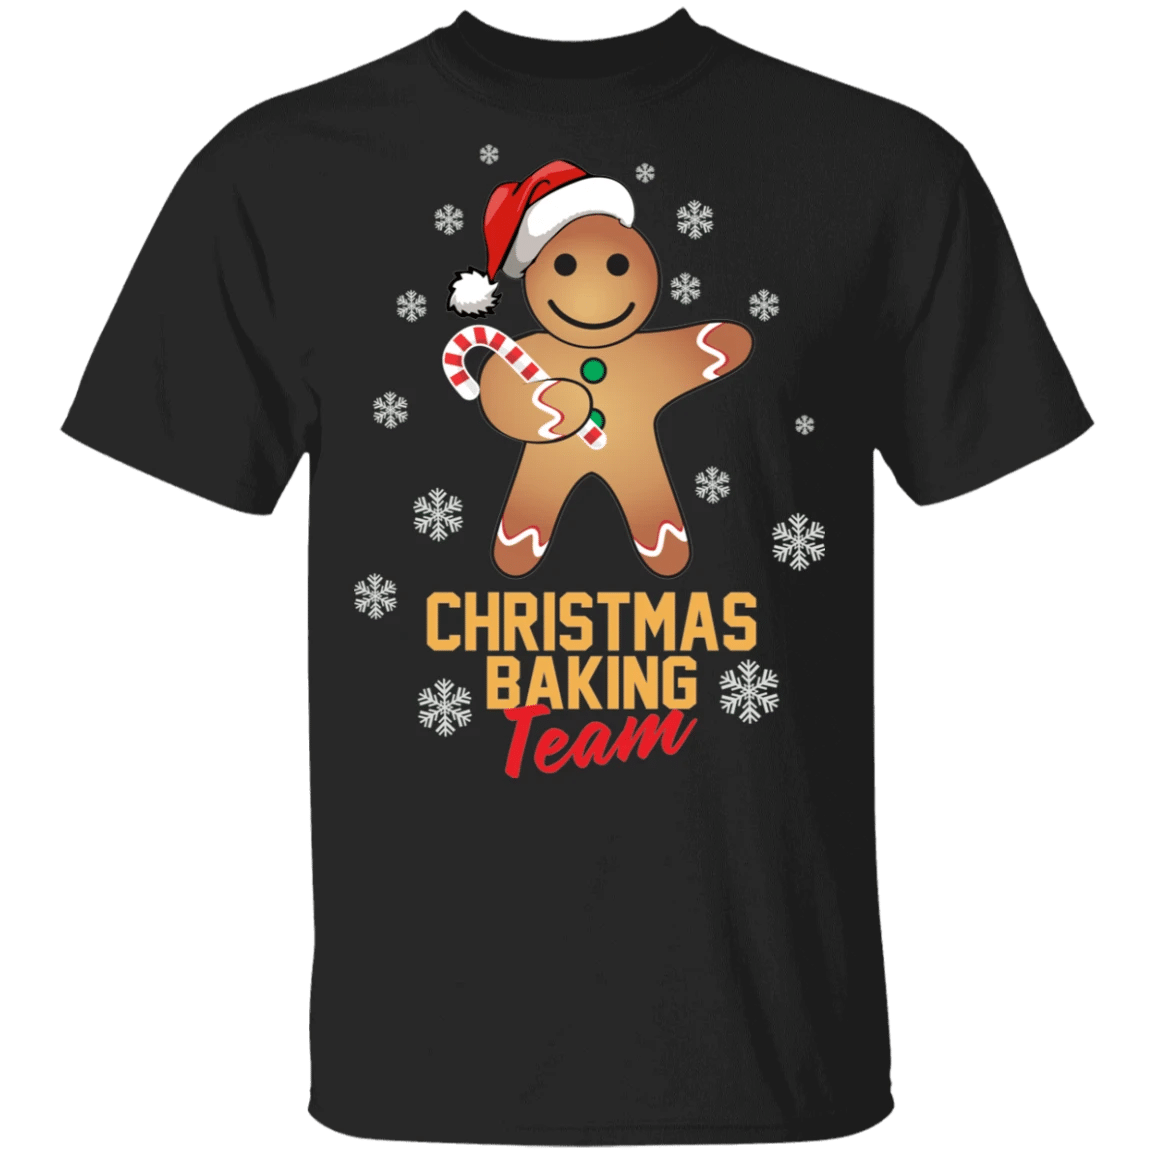 Christmas Baking Team Gingerbread Man Santa With Candy Cane Christmas T-Shirt Style: Unisex T-shirt, Color: Black